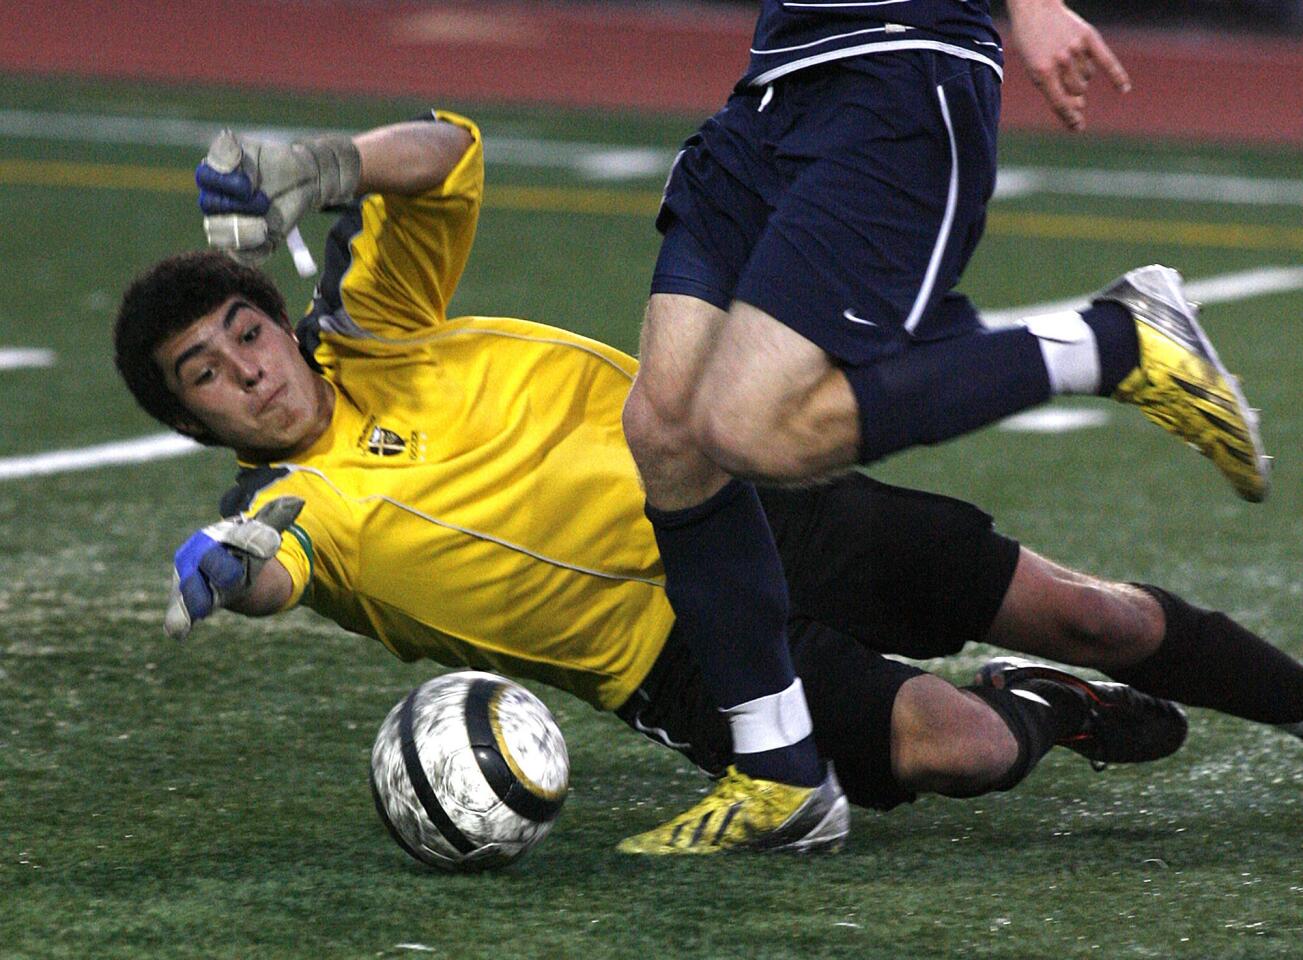 St. Francis' Luca Coppola drops and reaches for the ball as Notre Dame's Kyle Ause successfully gets the ball around him to score in the first half in a Mission League soccer match at St. Francis High School in La Canada Flintridge on Monday, February 4, 2013. Notre Dame won the game 4-0.